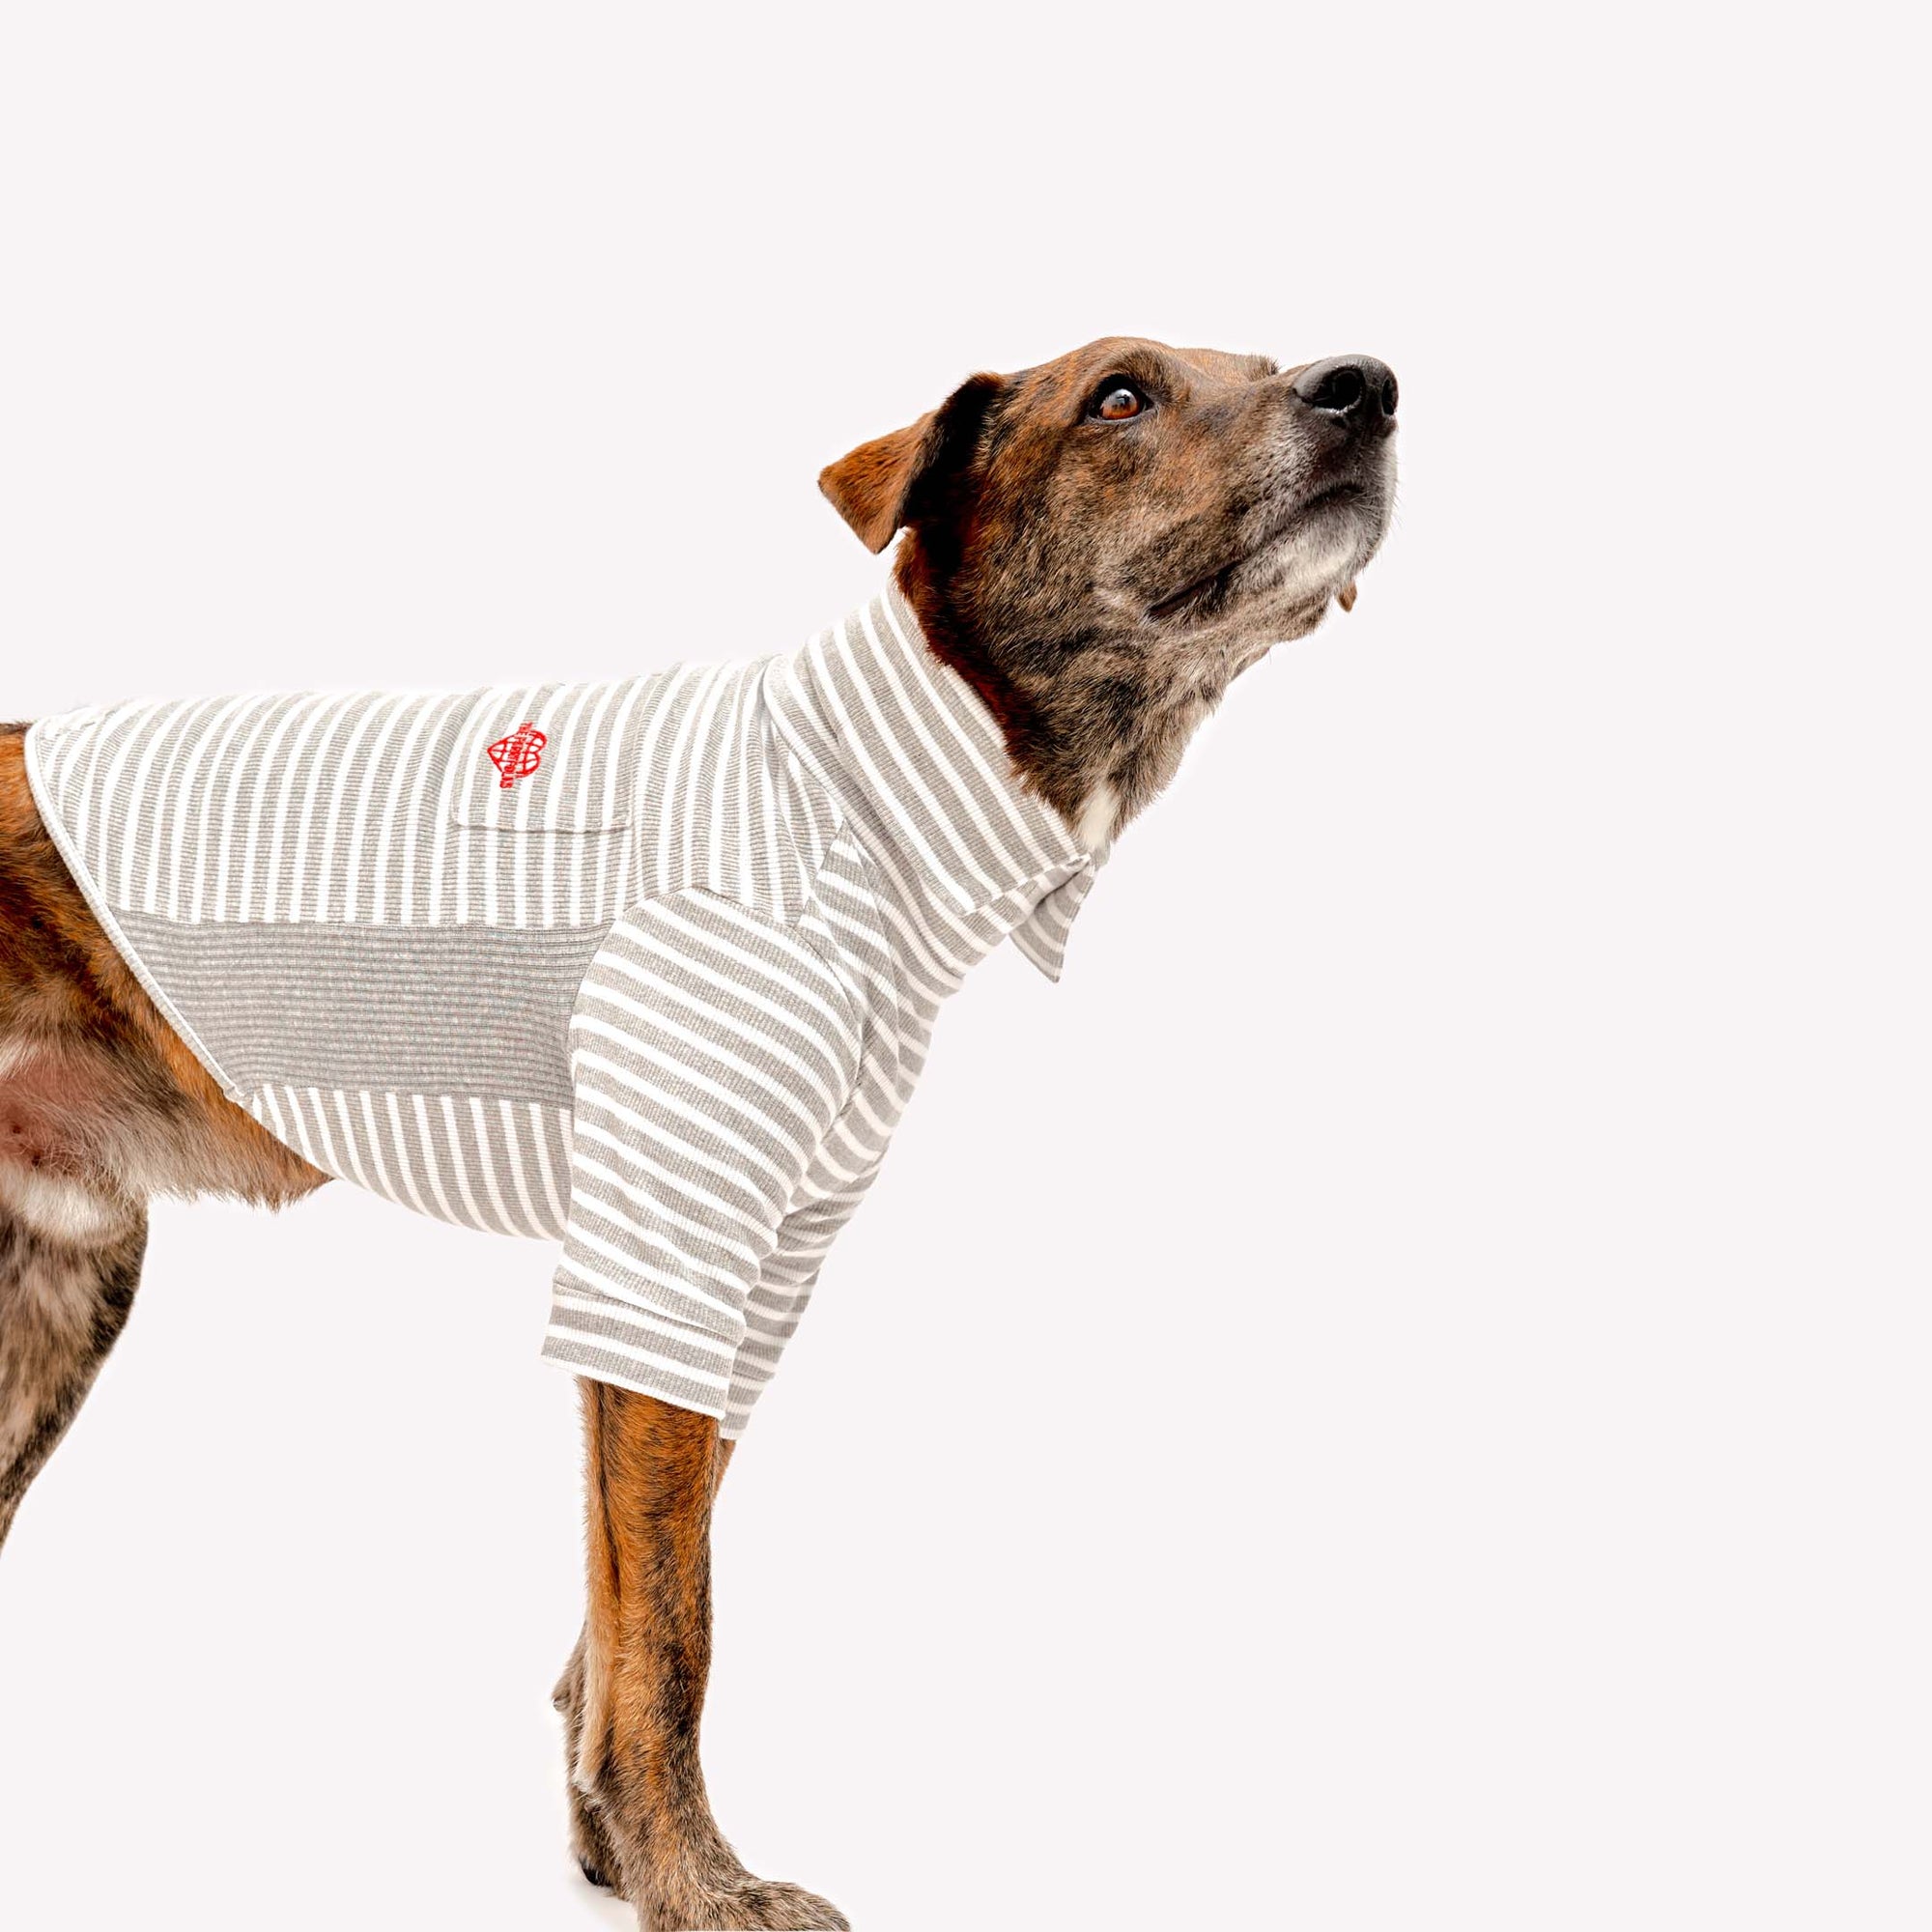 A dog with brindle fur is standing side profile wearing a striped grey and white turtleneck sweater with a small red emblem on the back.